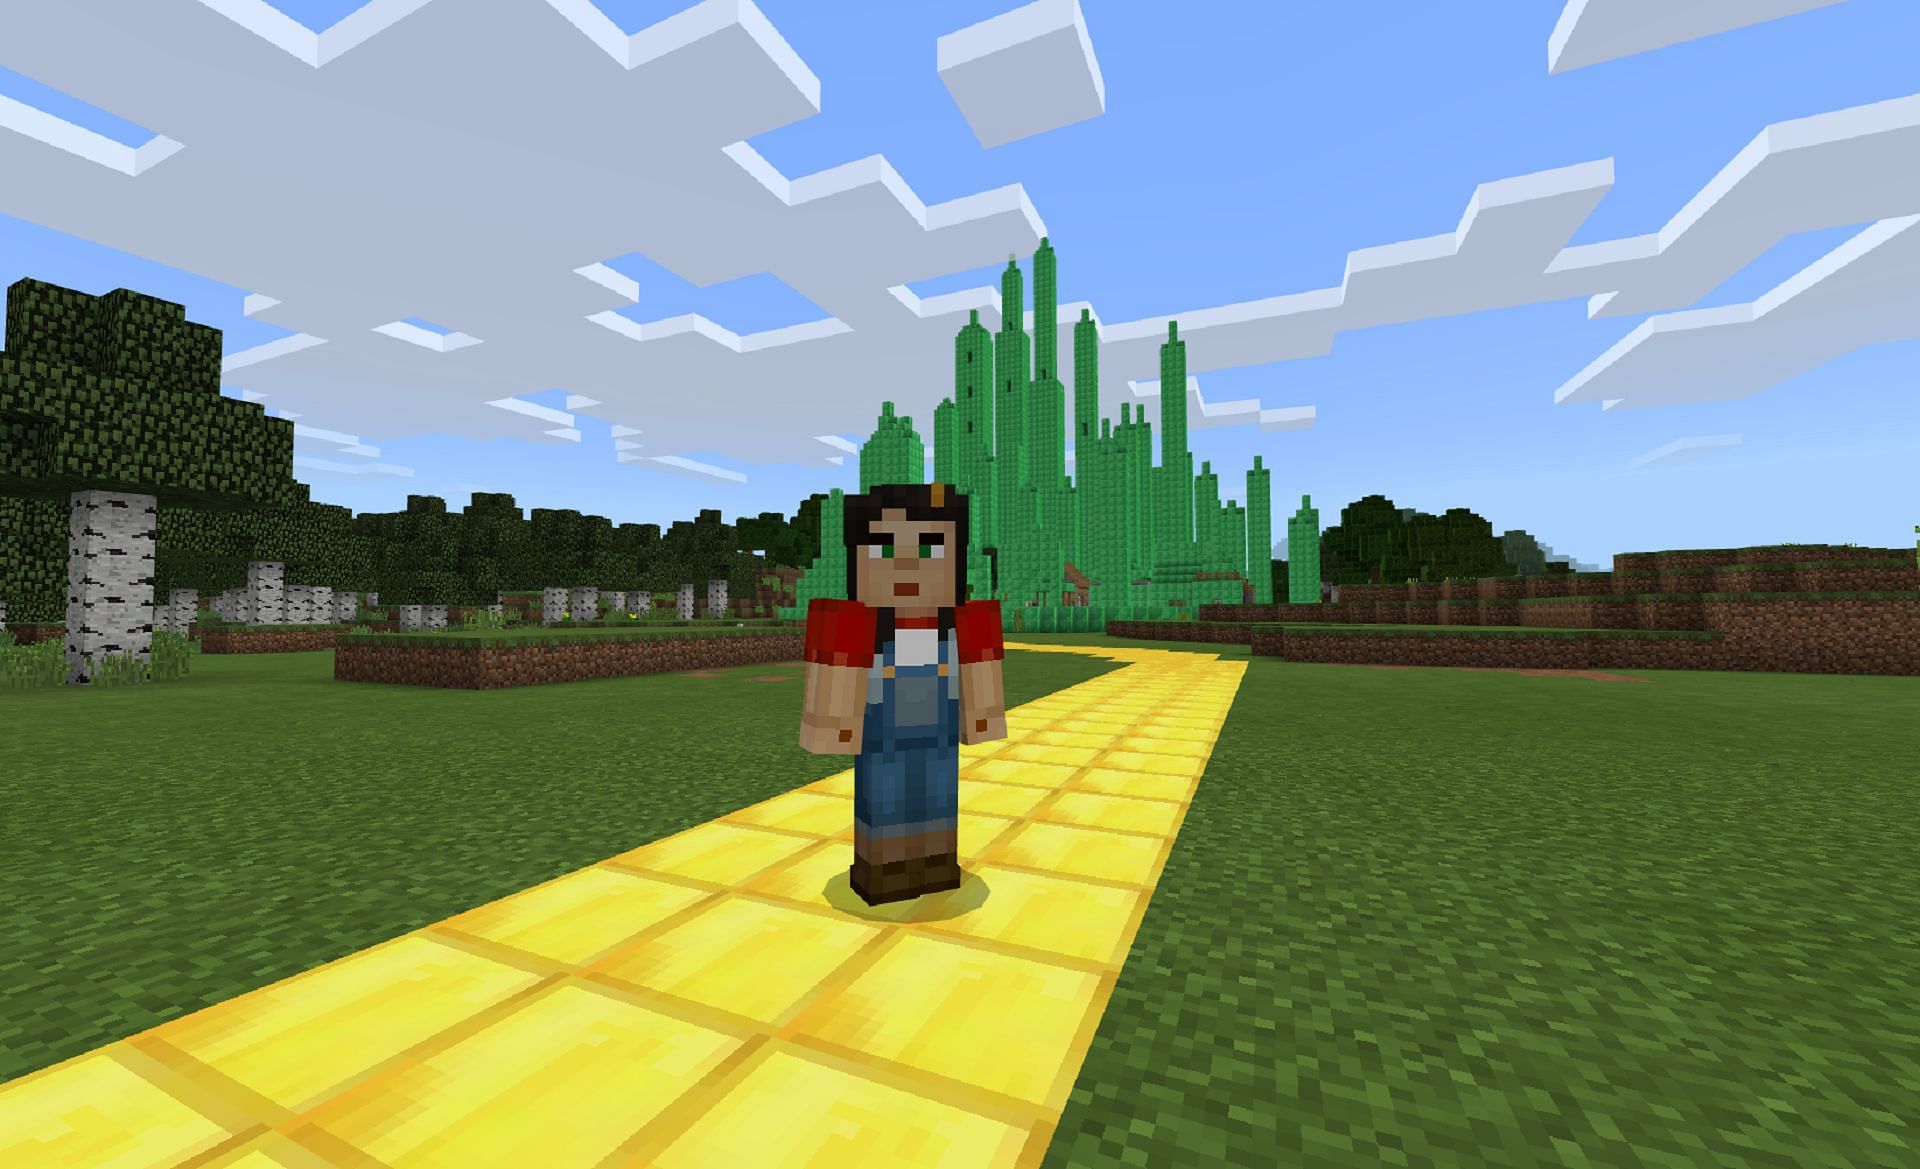 The Wizard of Oz&#039;s Emerald City was recreated as part of an Education Edition build challenge (Image via Mojang)